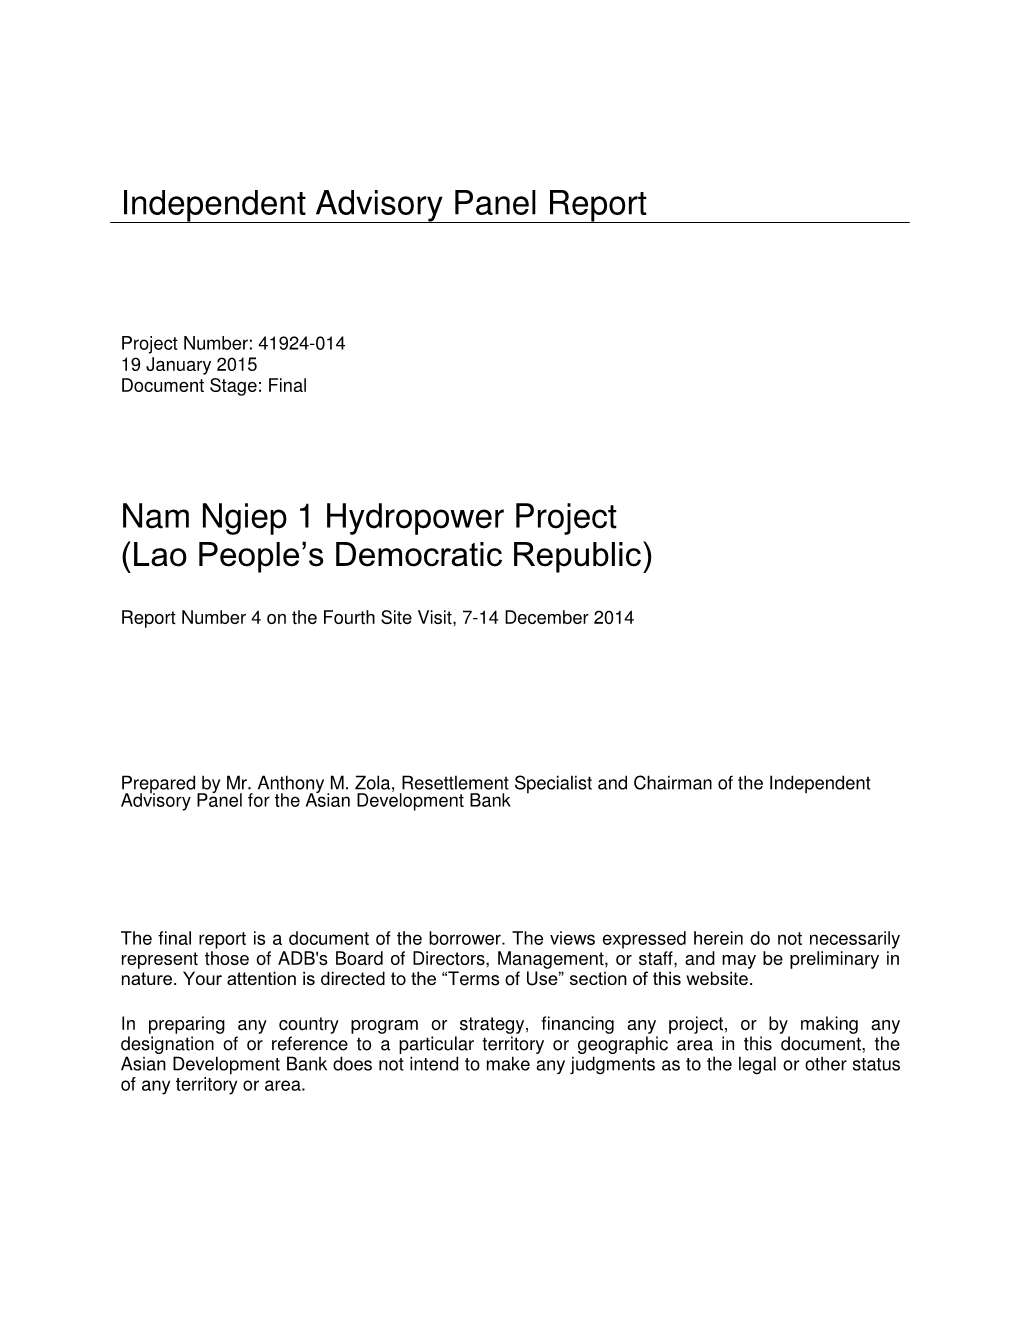 41924-014: Independent Advisory Panel Report No. 4 on the Fourth